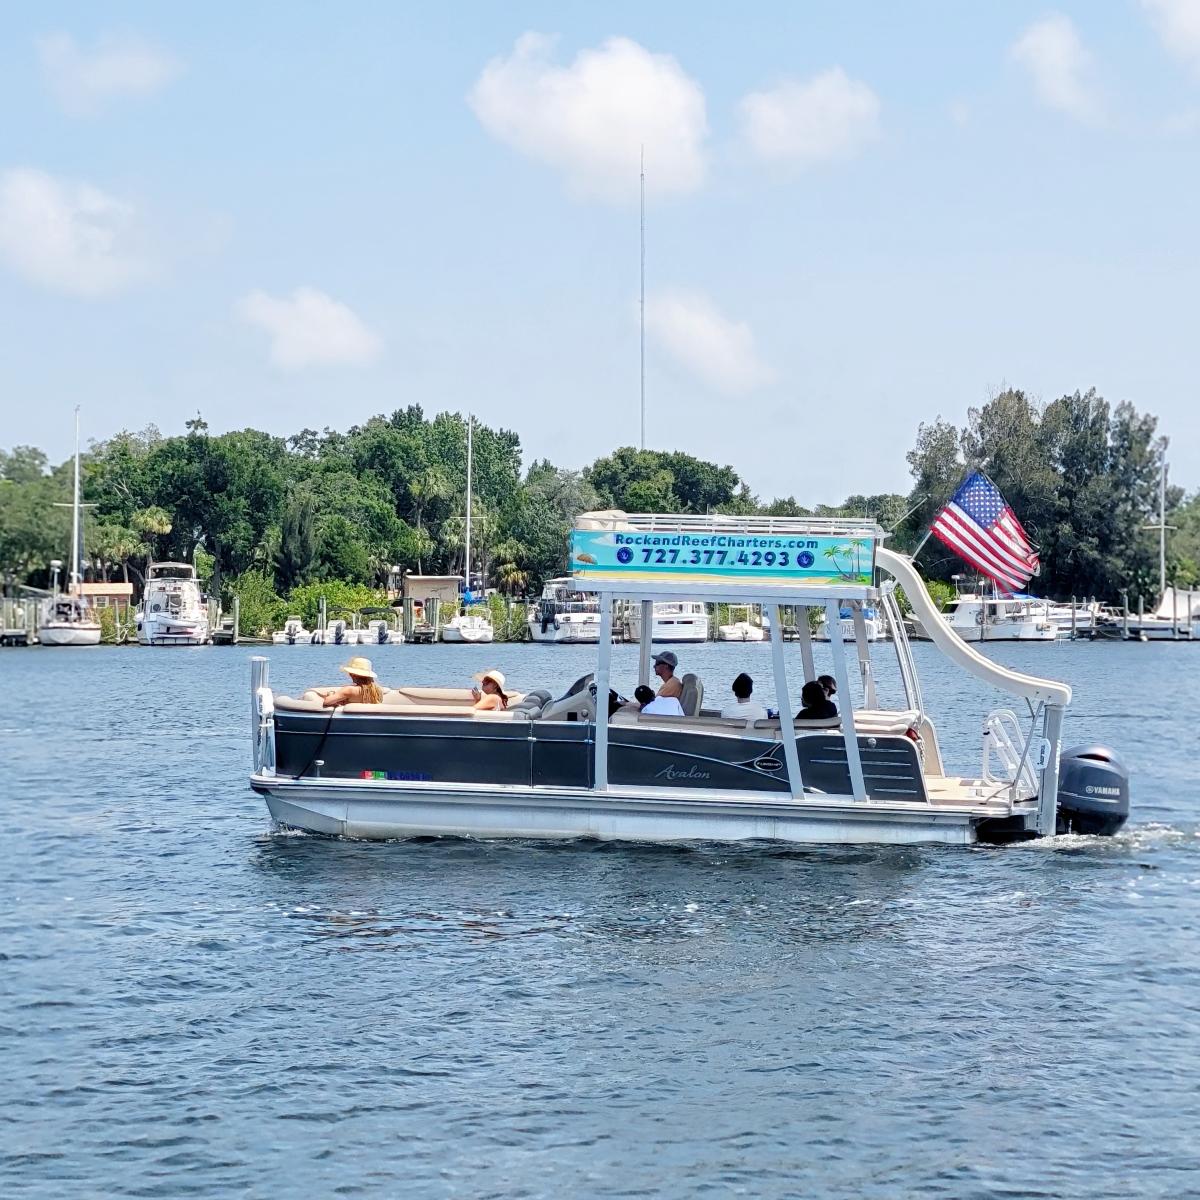 Rock and Reef Charters in Tarpon Springs